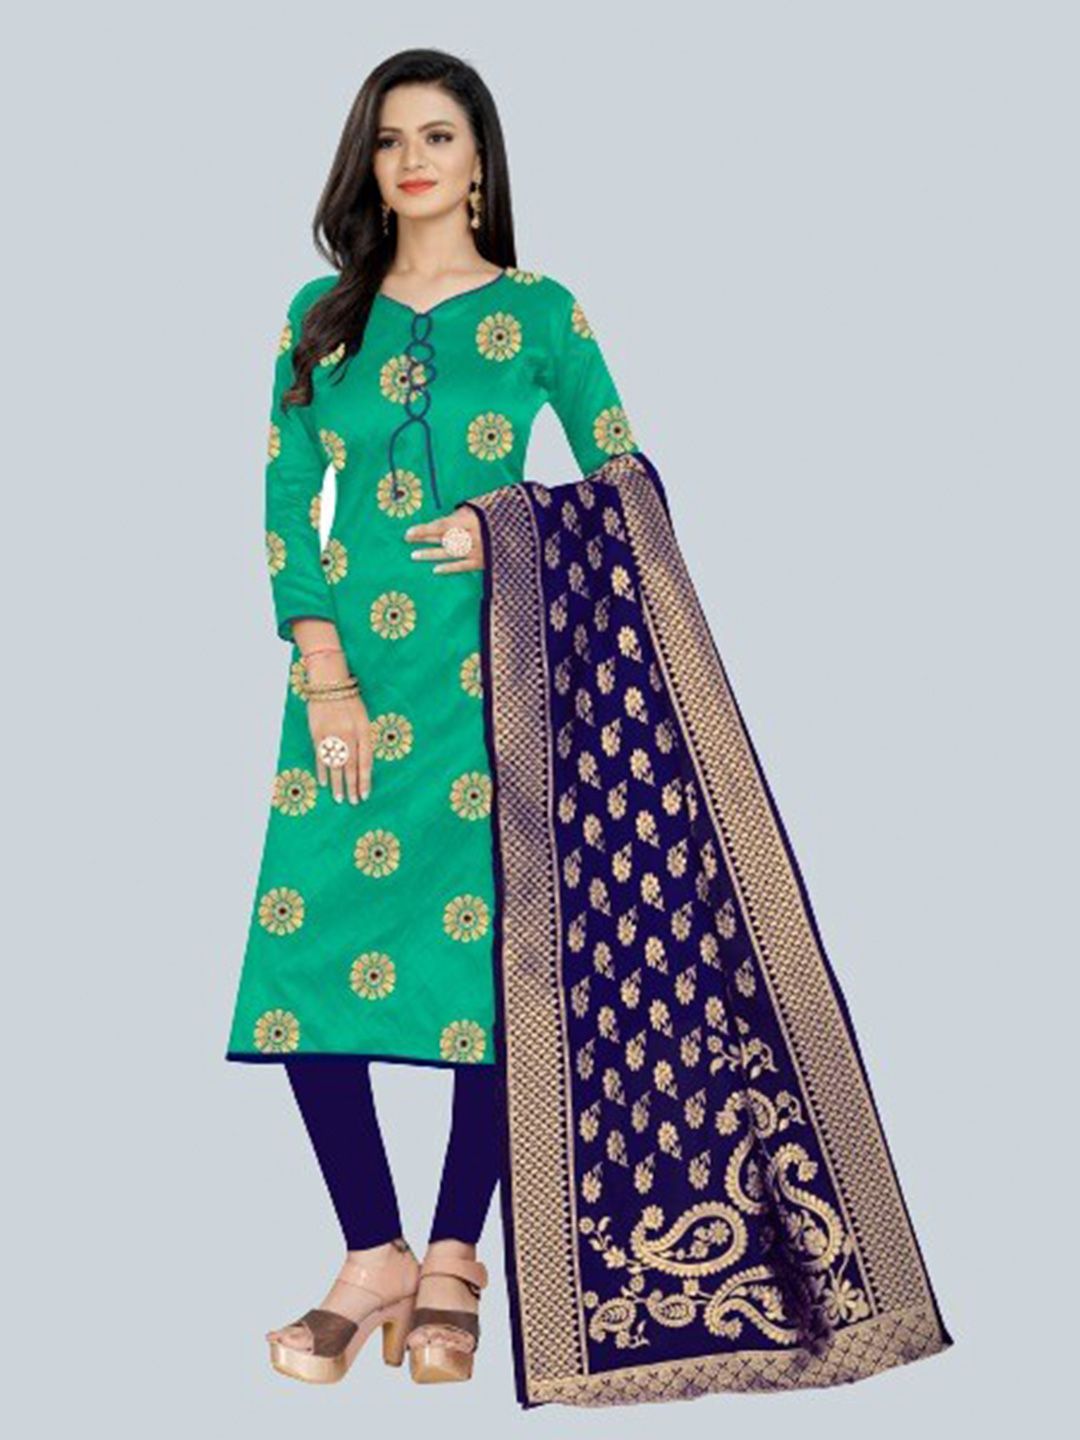 MORLY Sea Green & Navy Blue Woven Design Dupion Silk Unstitched Dress Material Price in India